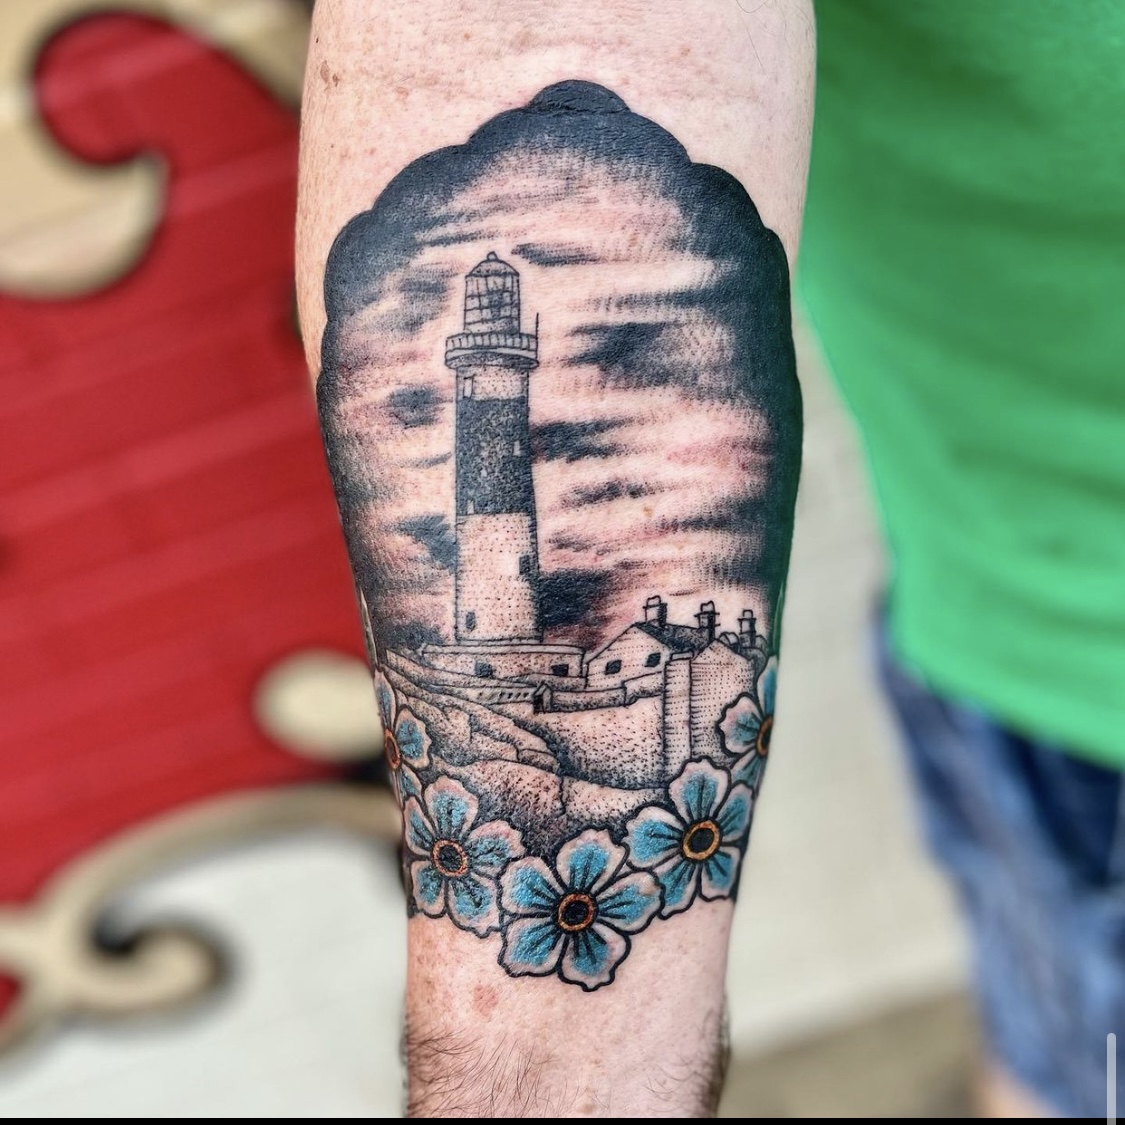 Tattoo of a lighthouse from the best tattoo artist in dallas